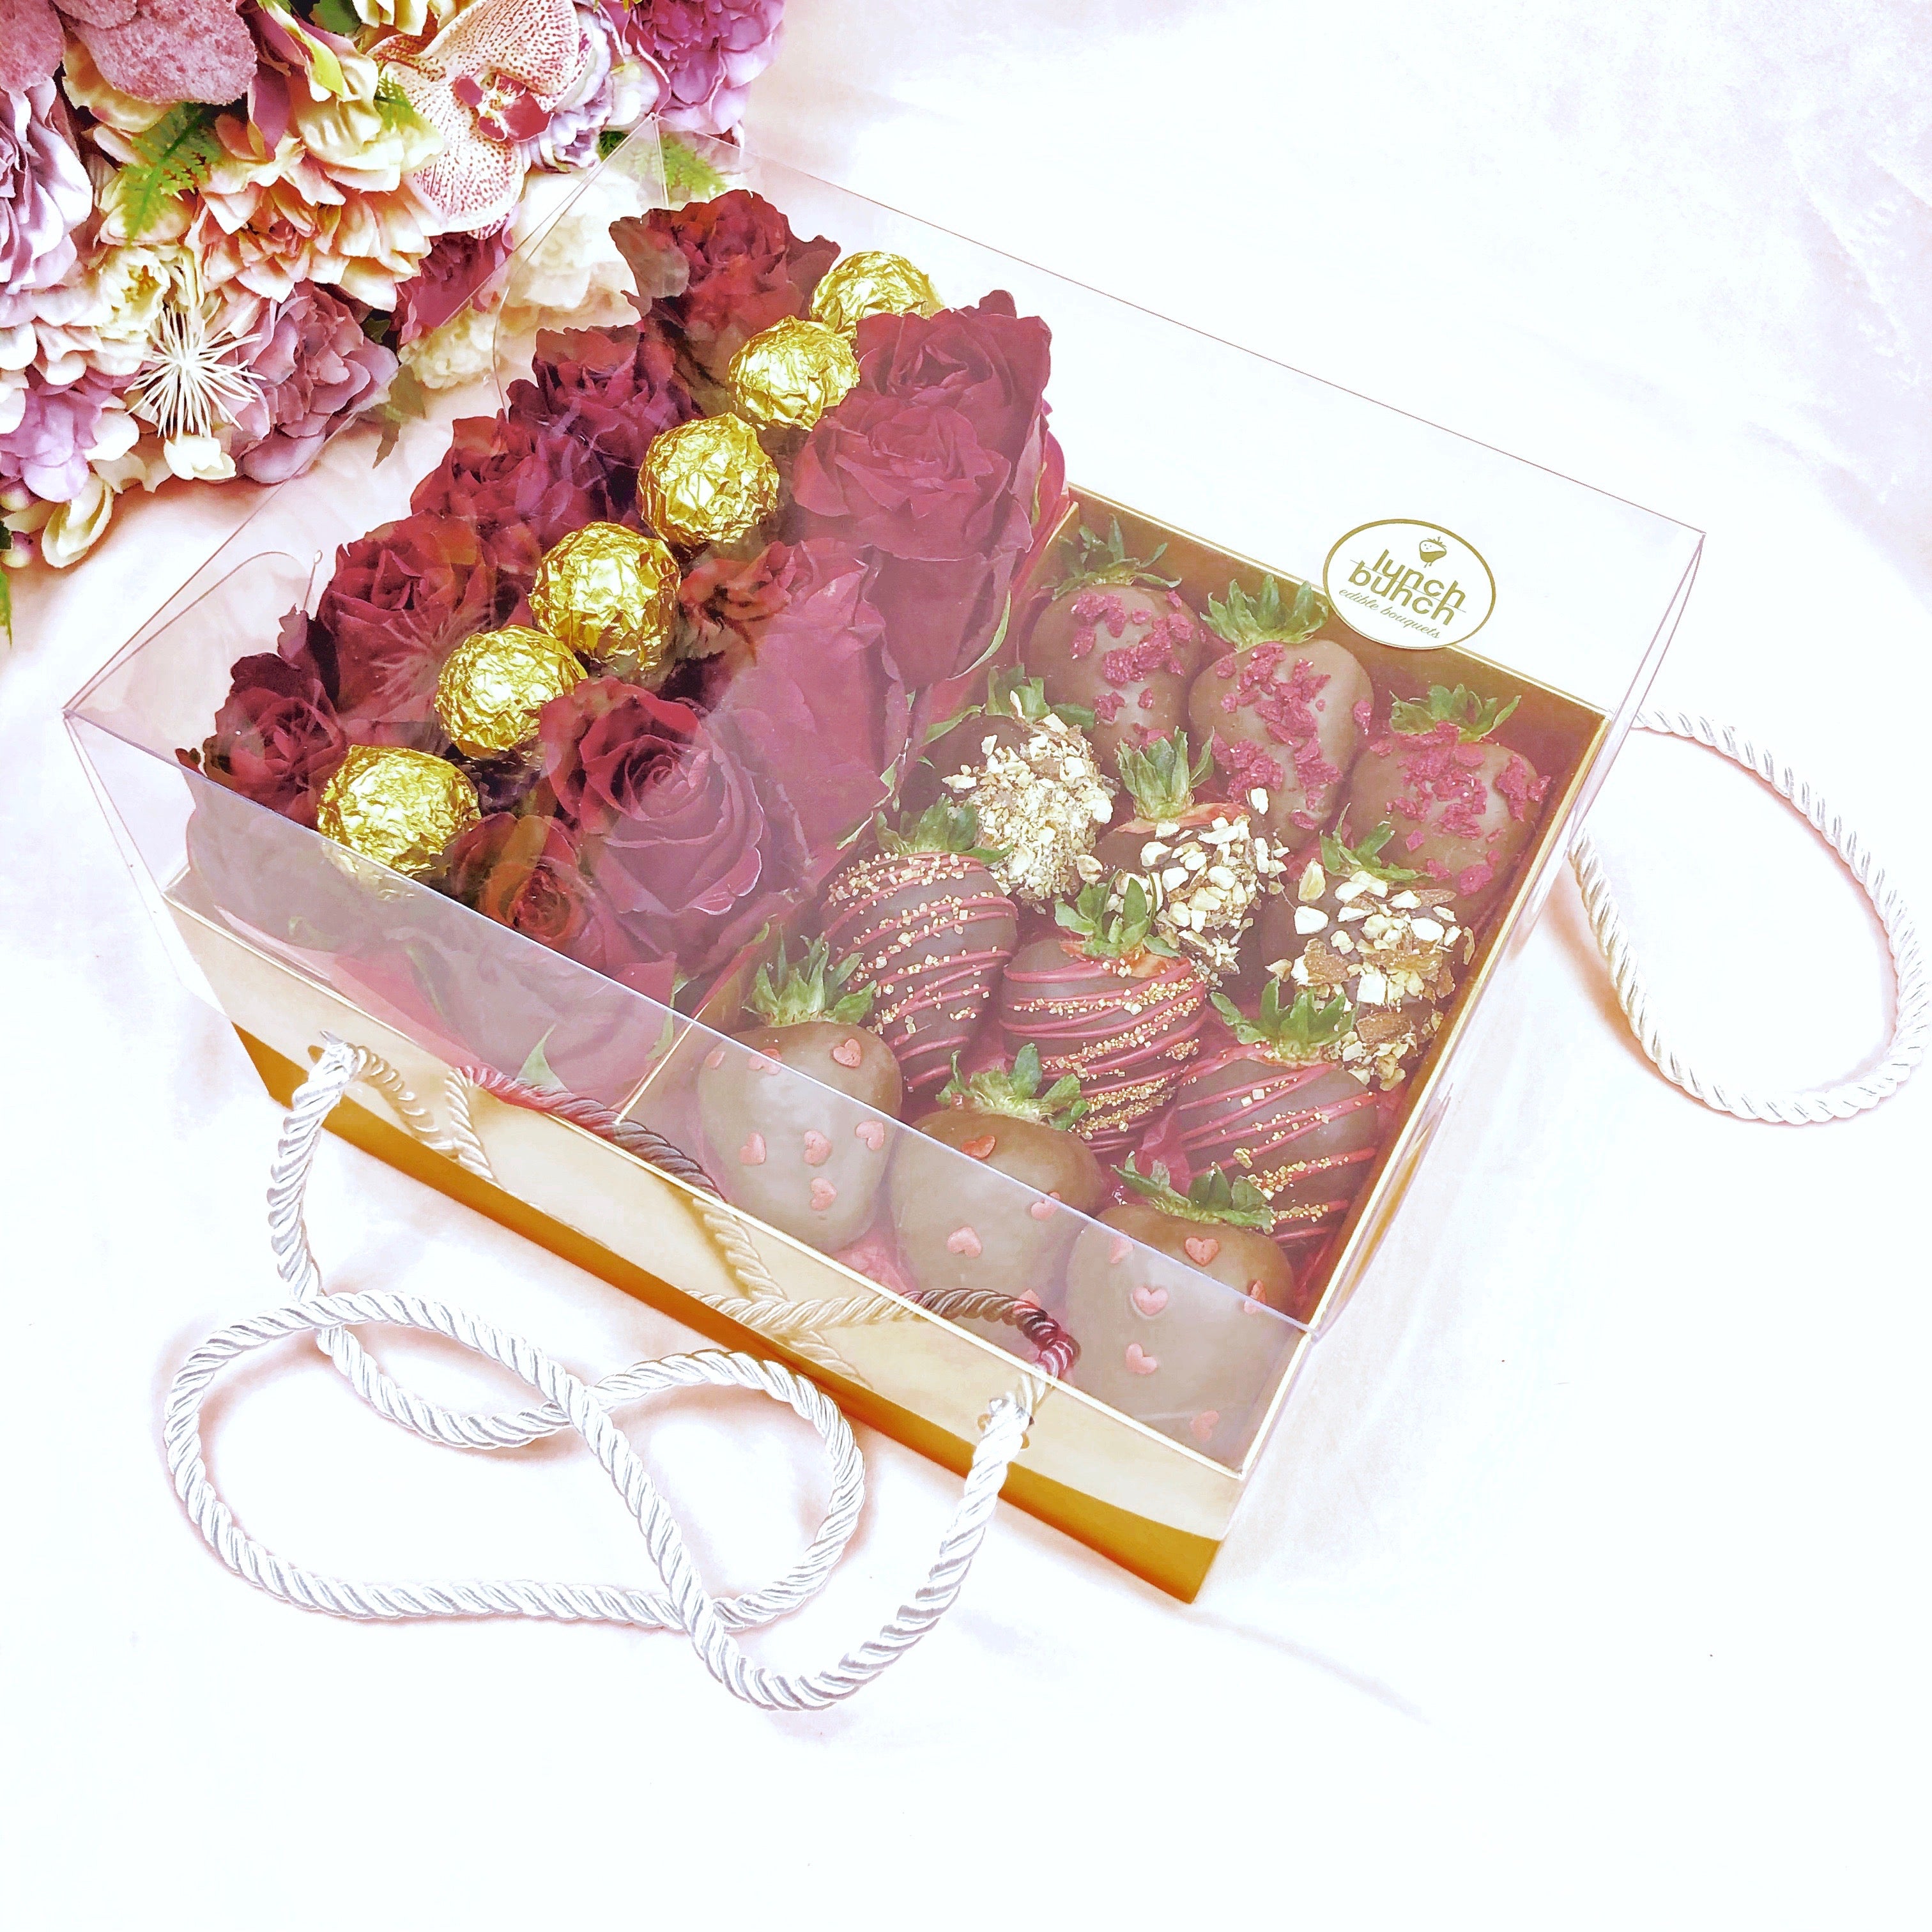 Chocolate Strawberry & Roses Gift Hamper birthday gift of chocolate and roses order online same day delivery